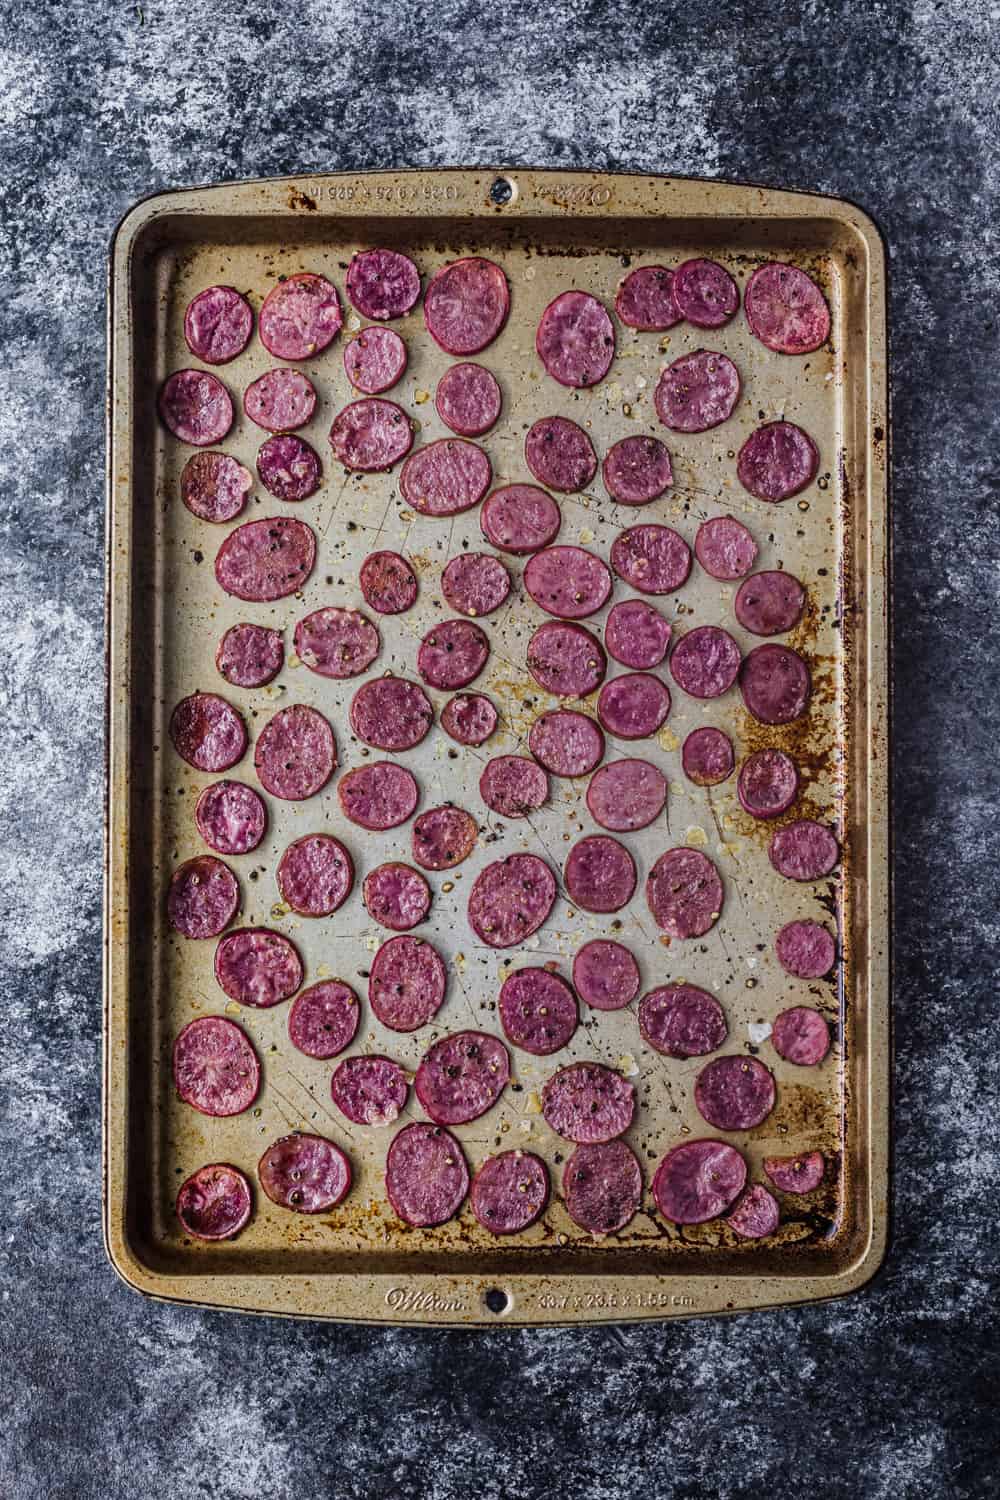 Overhead shot of a baking sheet with thinly sliced roasted pink potatoes, to be used in the farmers market salad